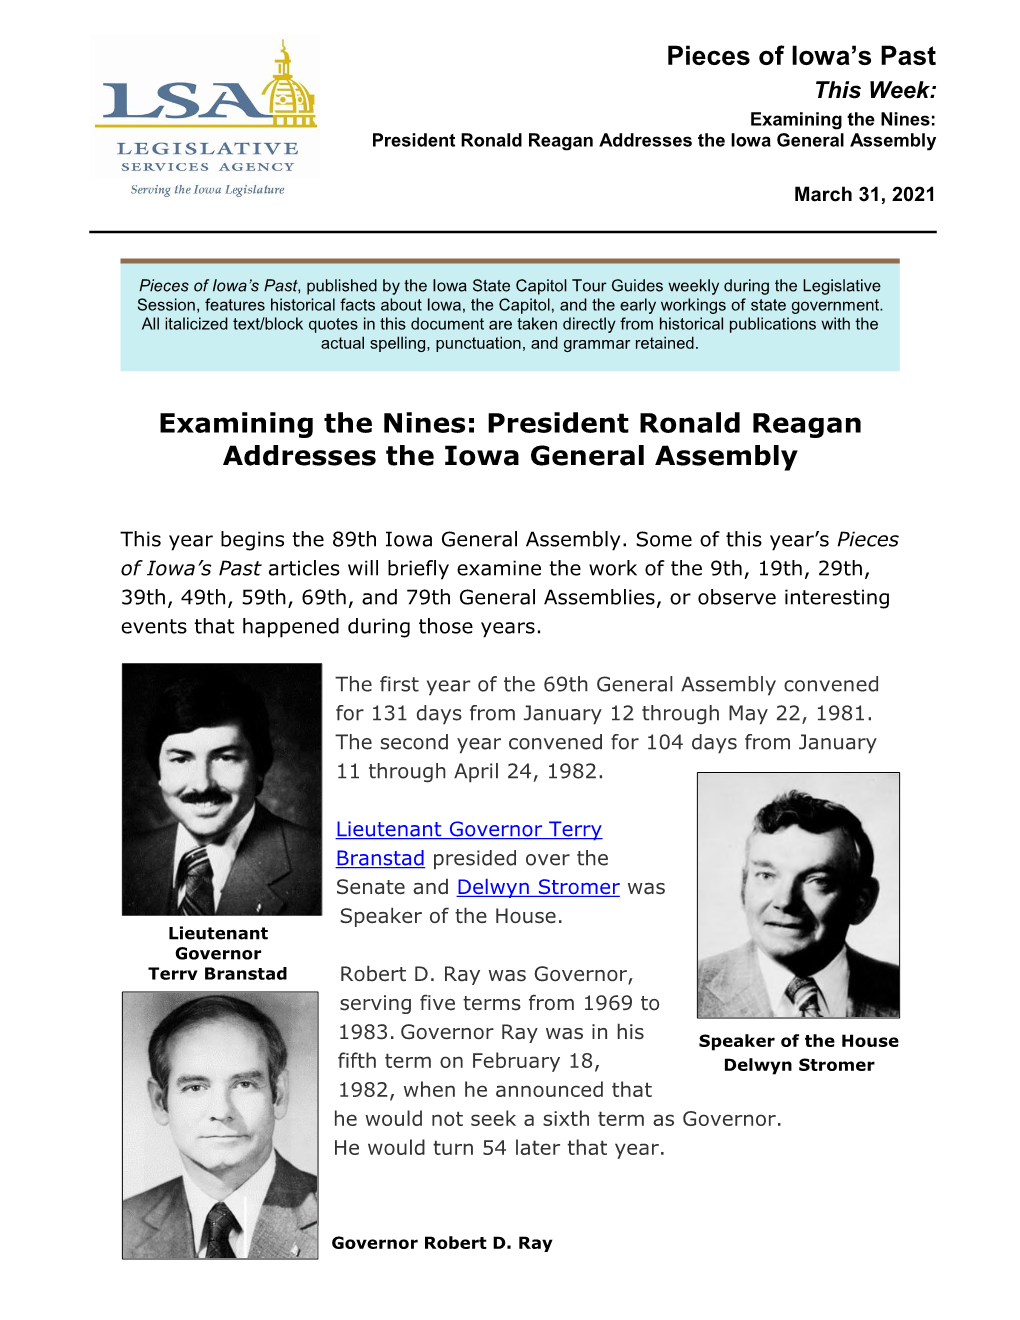 Examining the Nines: President Ronald Reagan Addresses the Iowa General Assembly